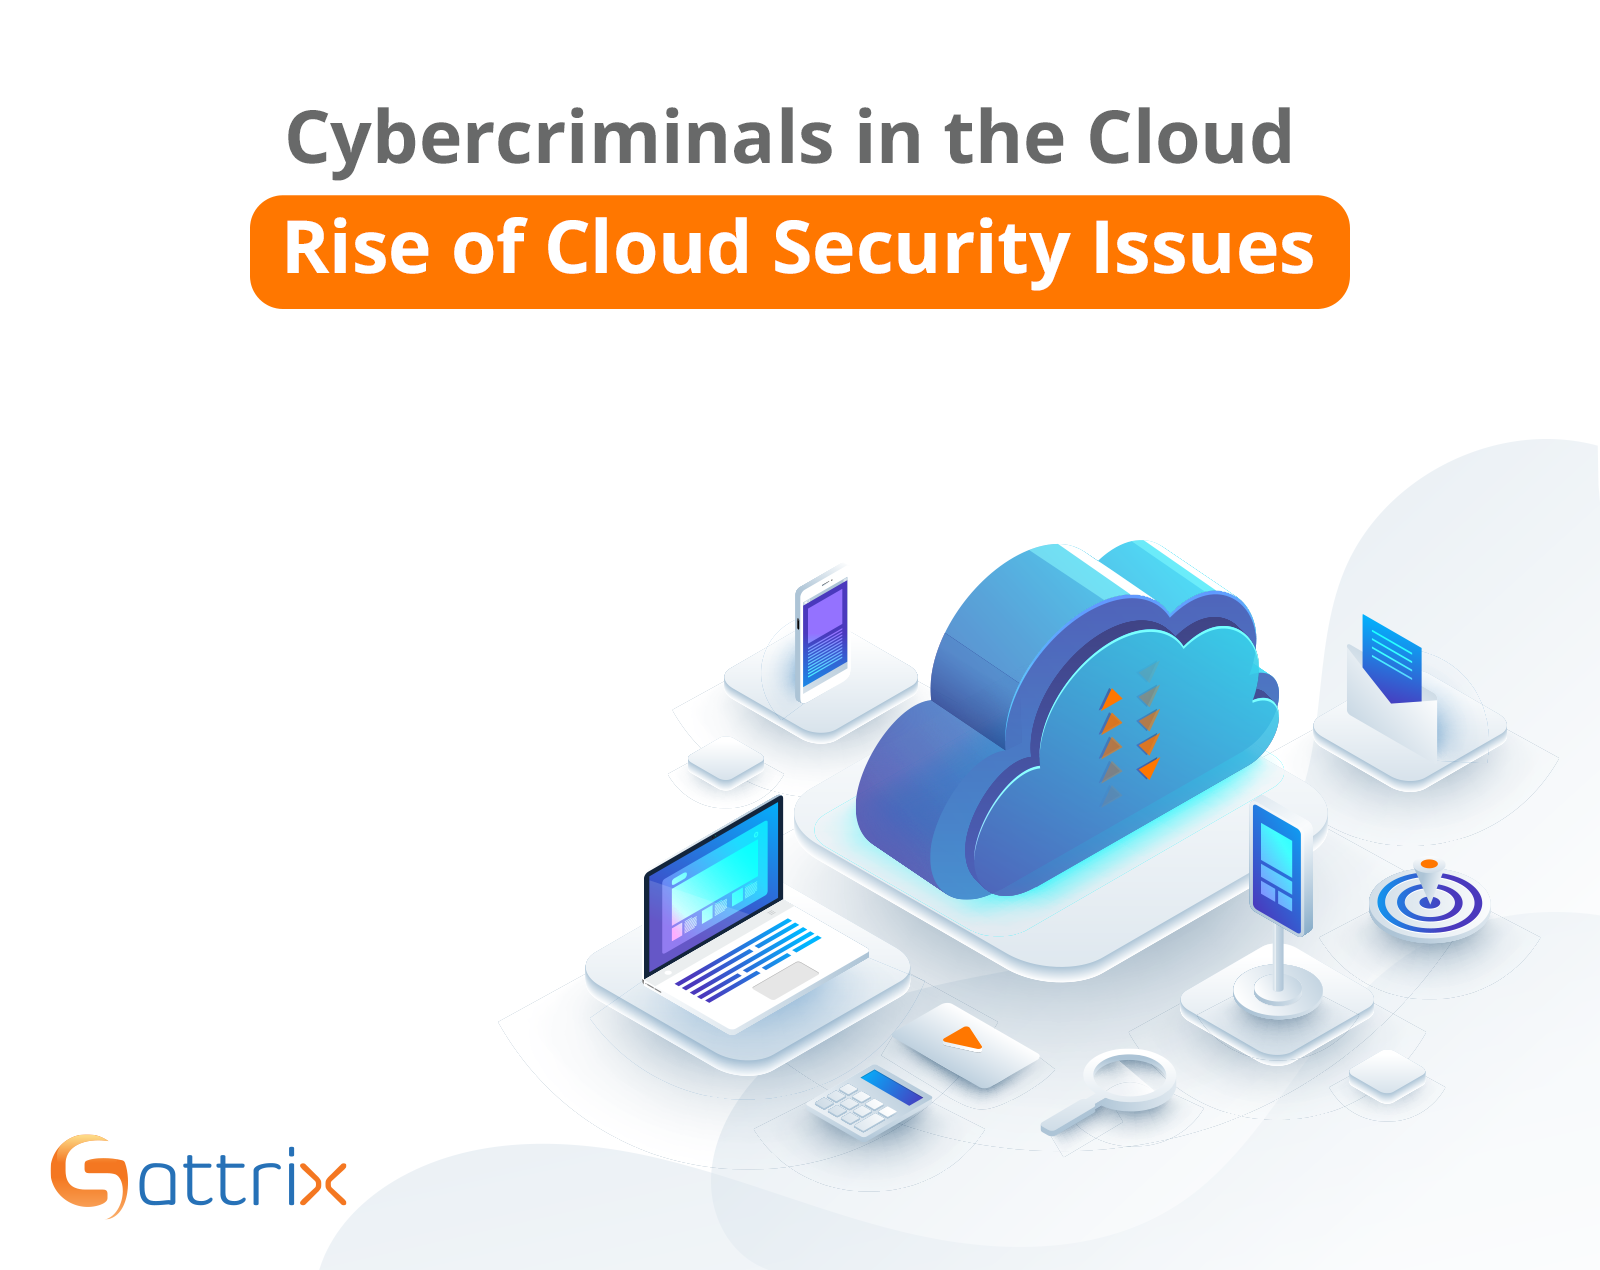 Cybercriminals in the Cloud: Rise of Cloud Security Issues